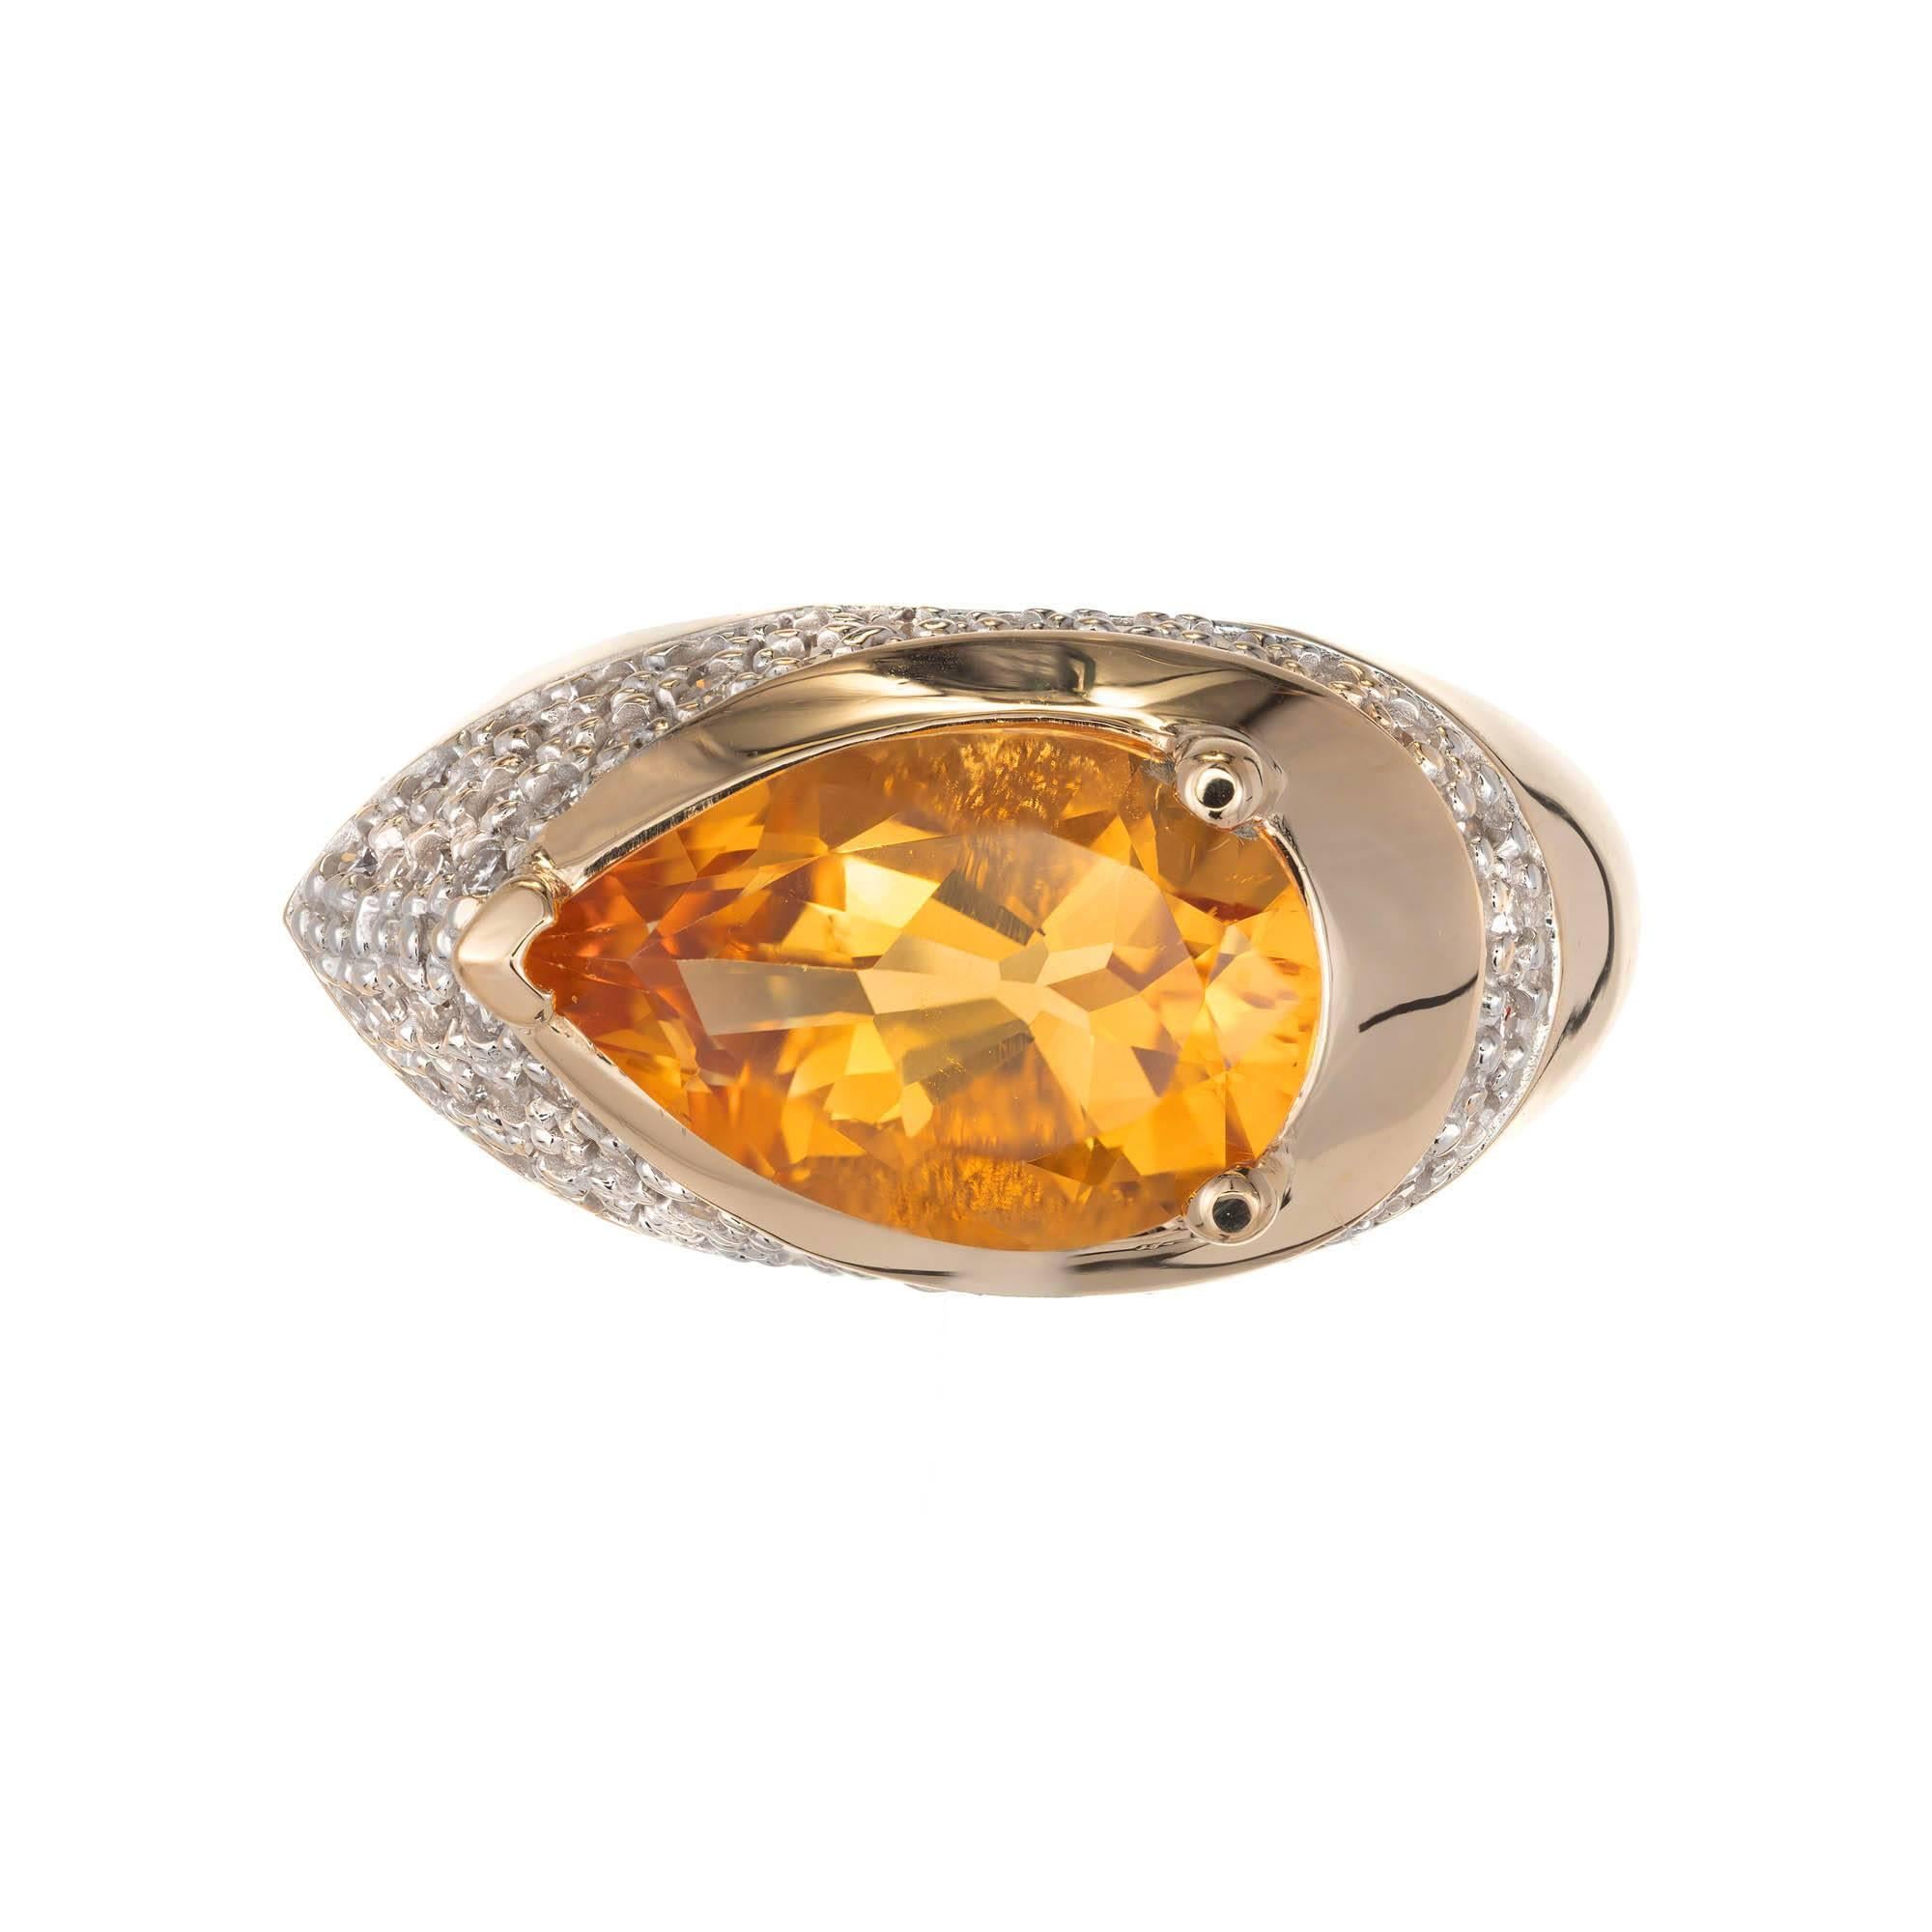 14k yellow and white gold citrine and diamond cocktail ring. Pear shape citrine set in a high dome ring on the horizontal with a wide band of pave set diamonds from the point of wrapping down and behind the curve of the pear citrine getting narrower